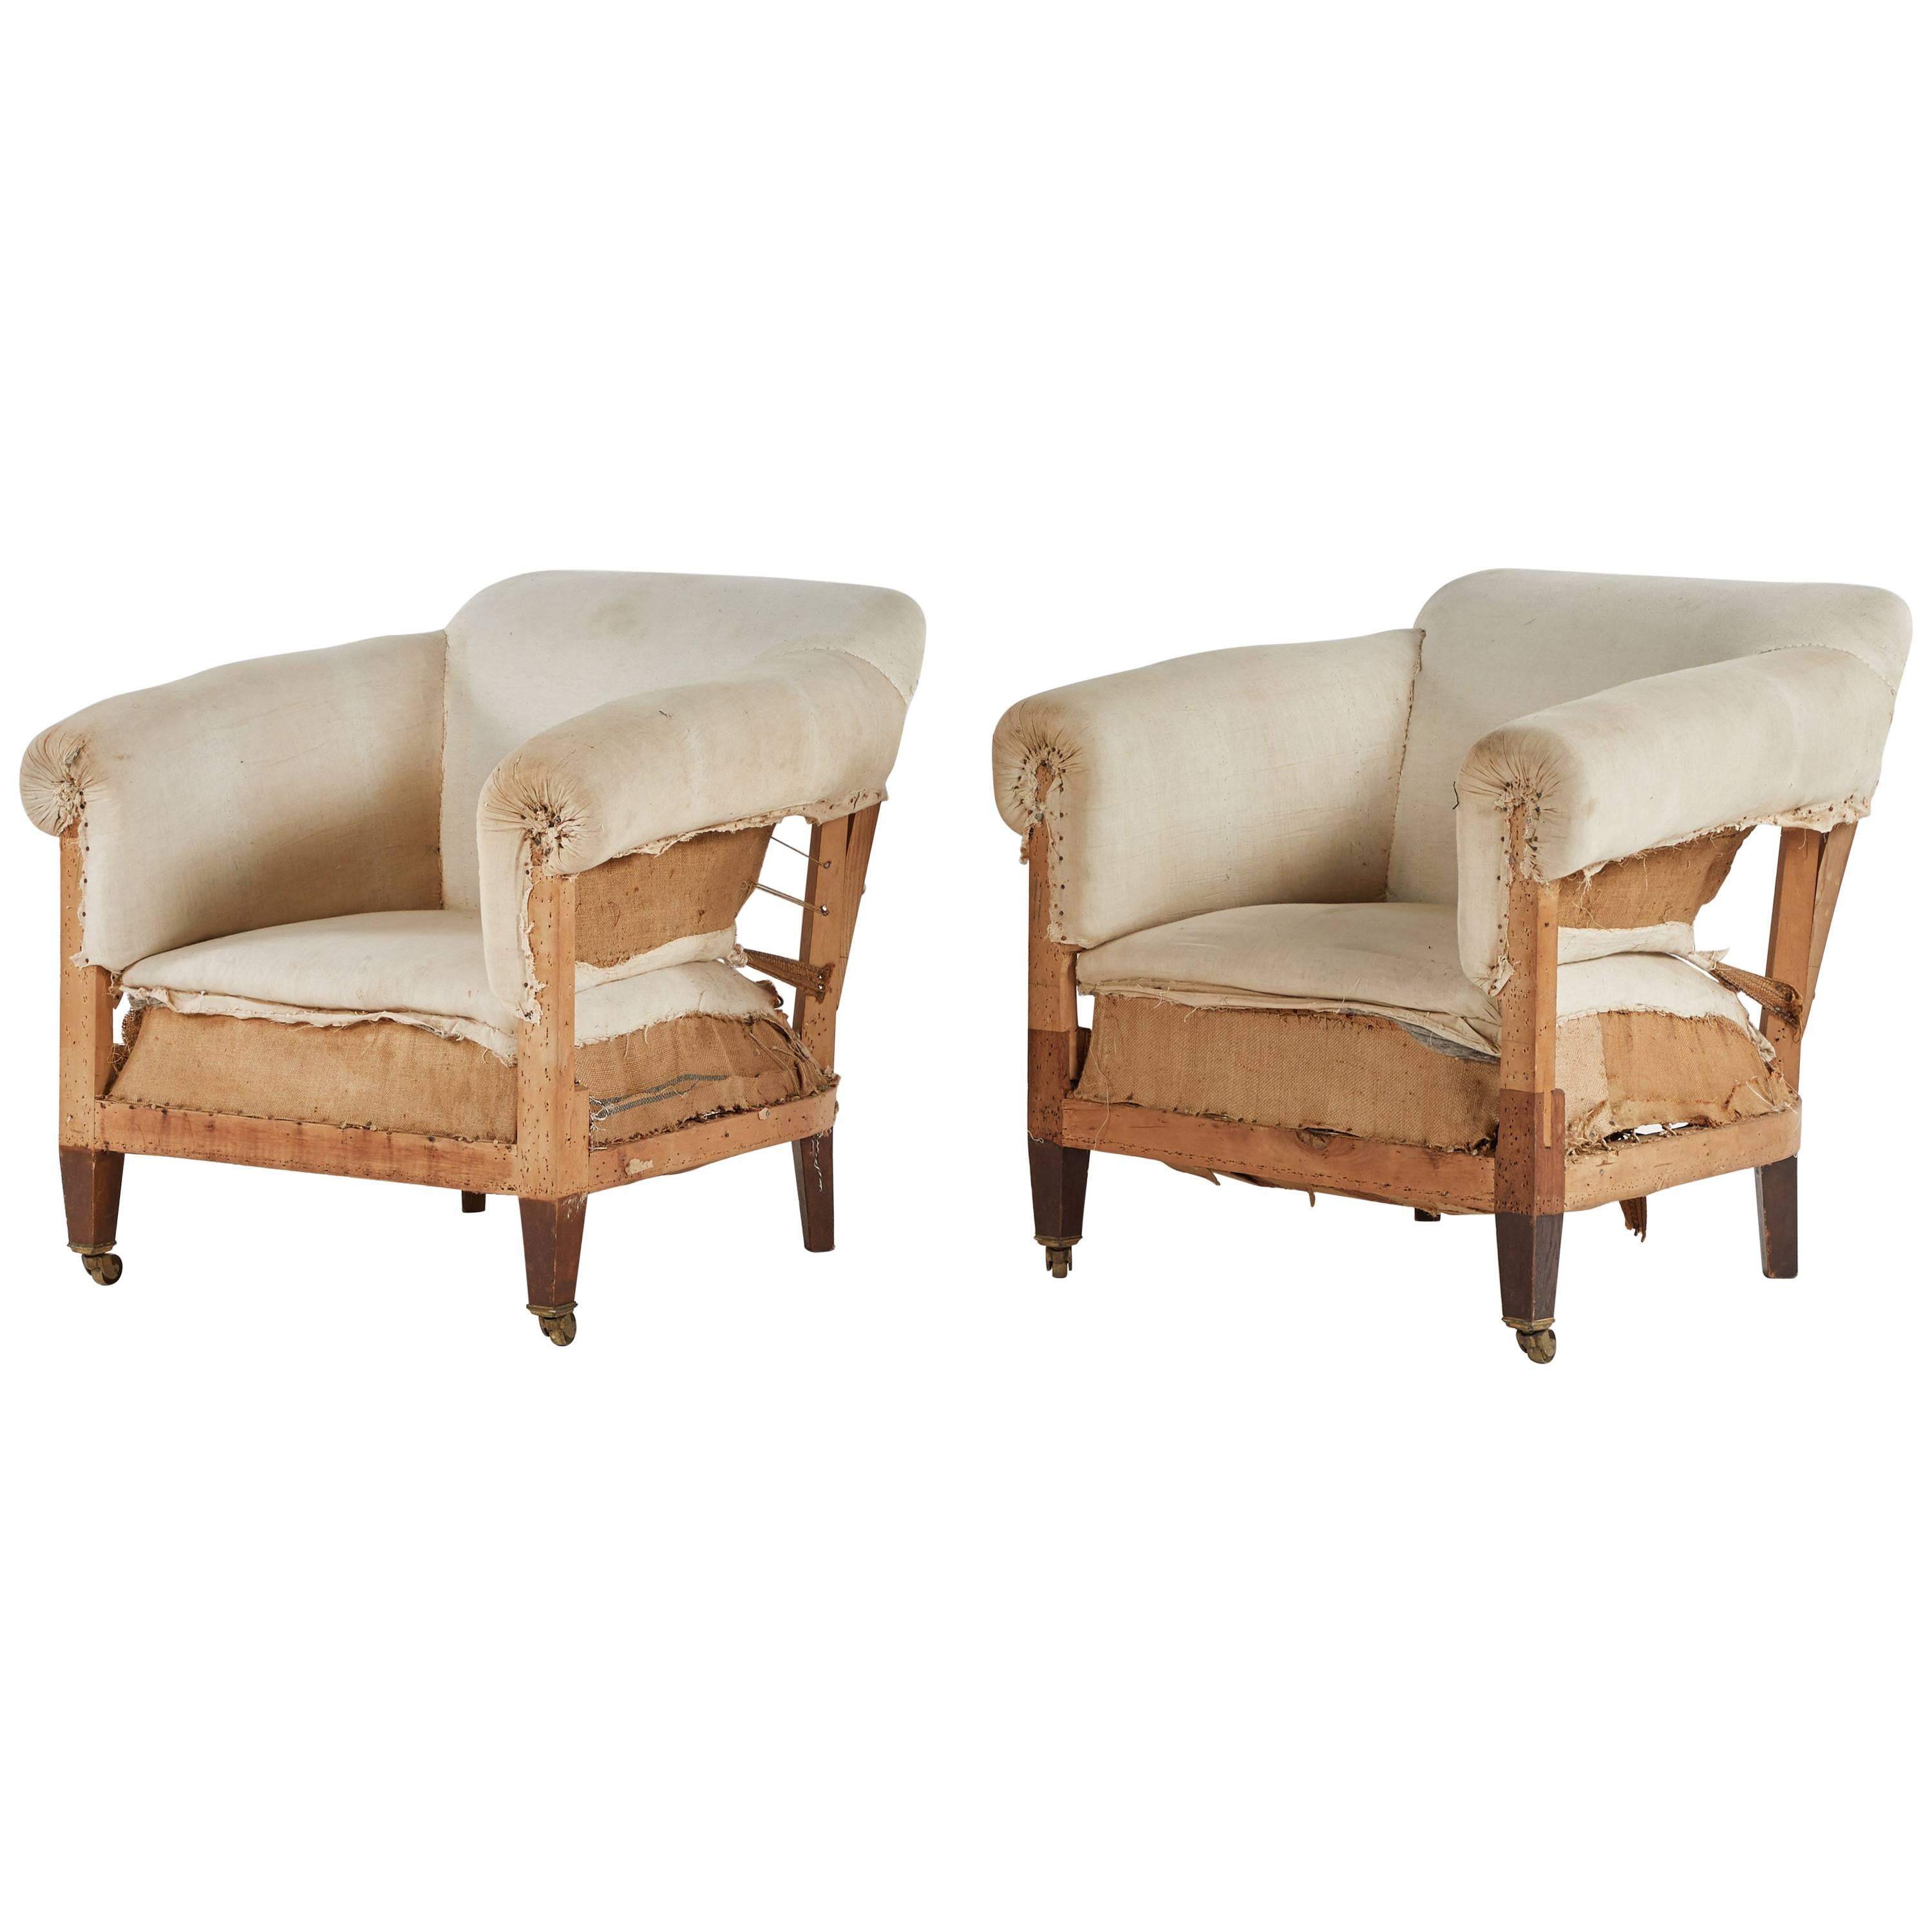 Late 19th Century Pair of French Upholstered Wood Chairs. 